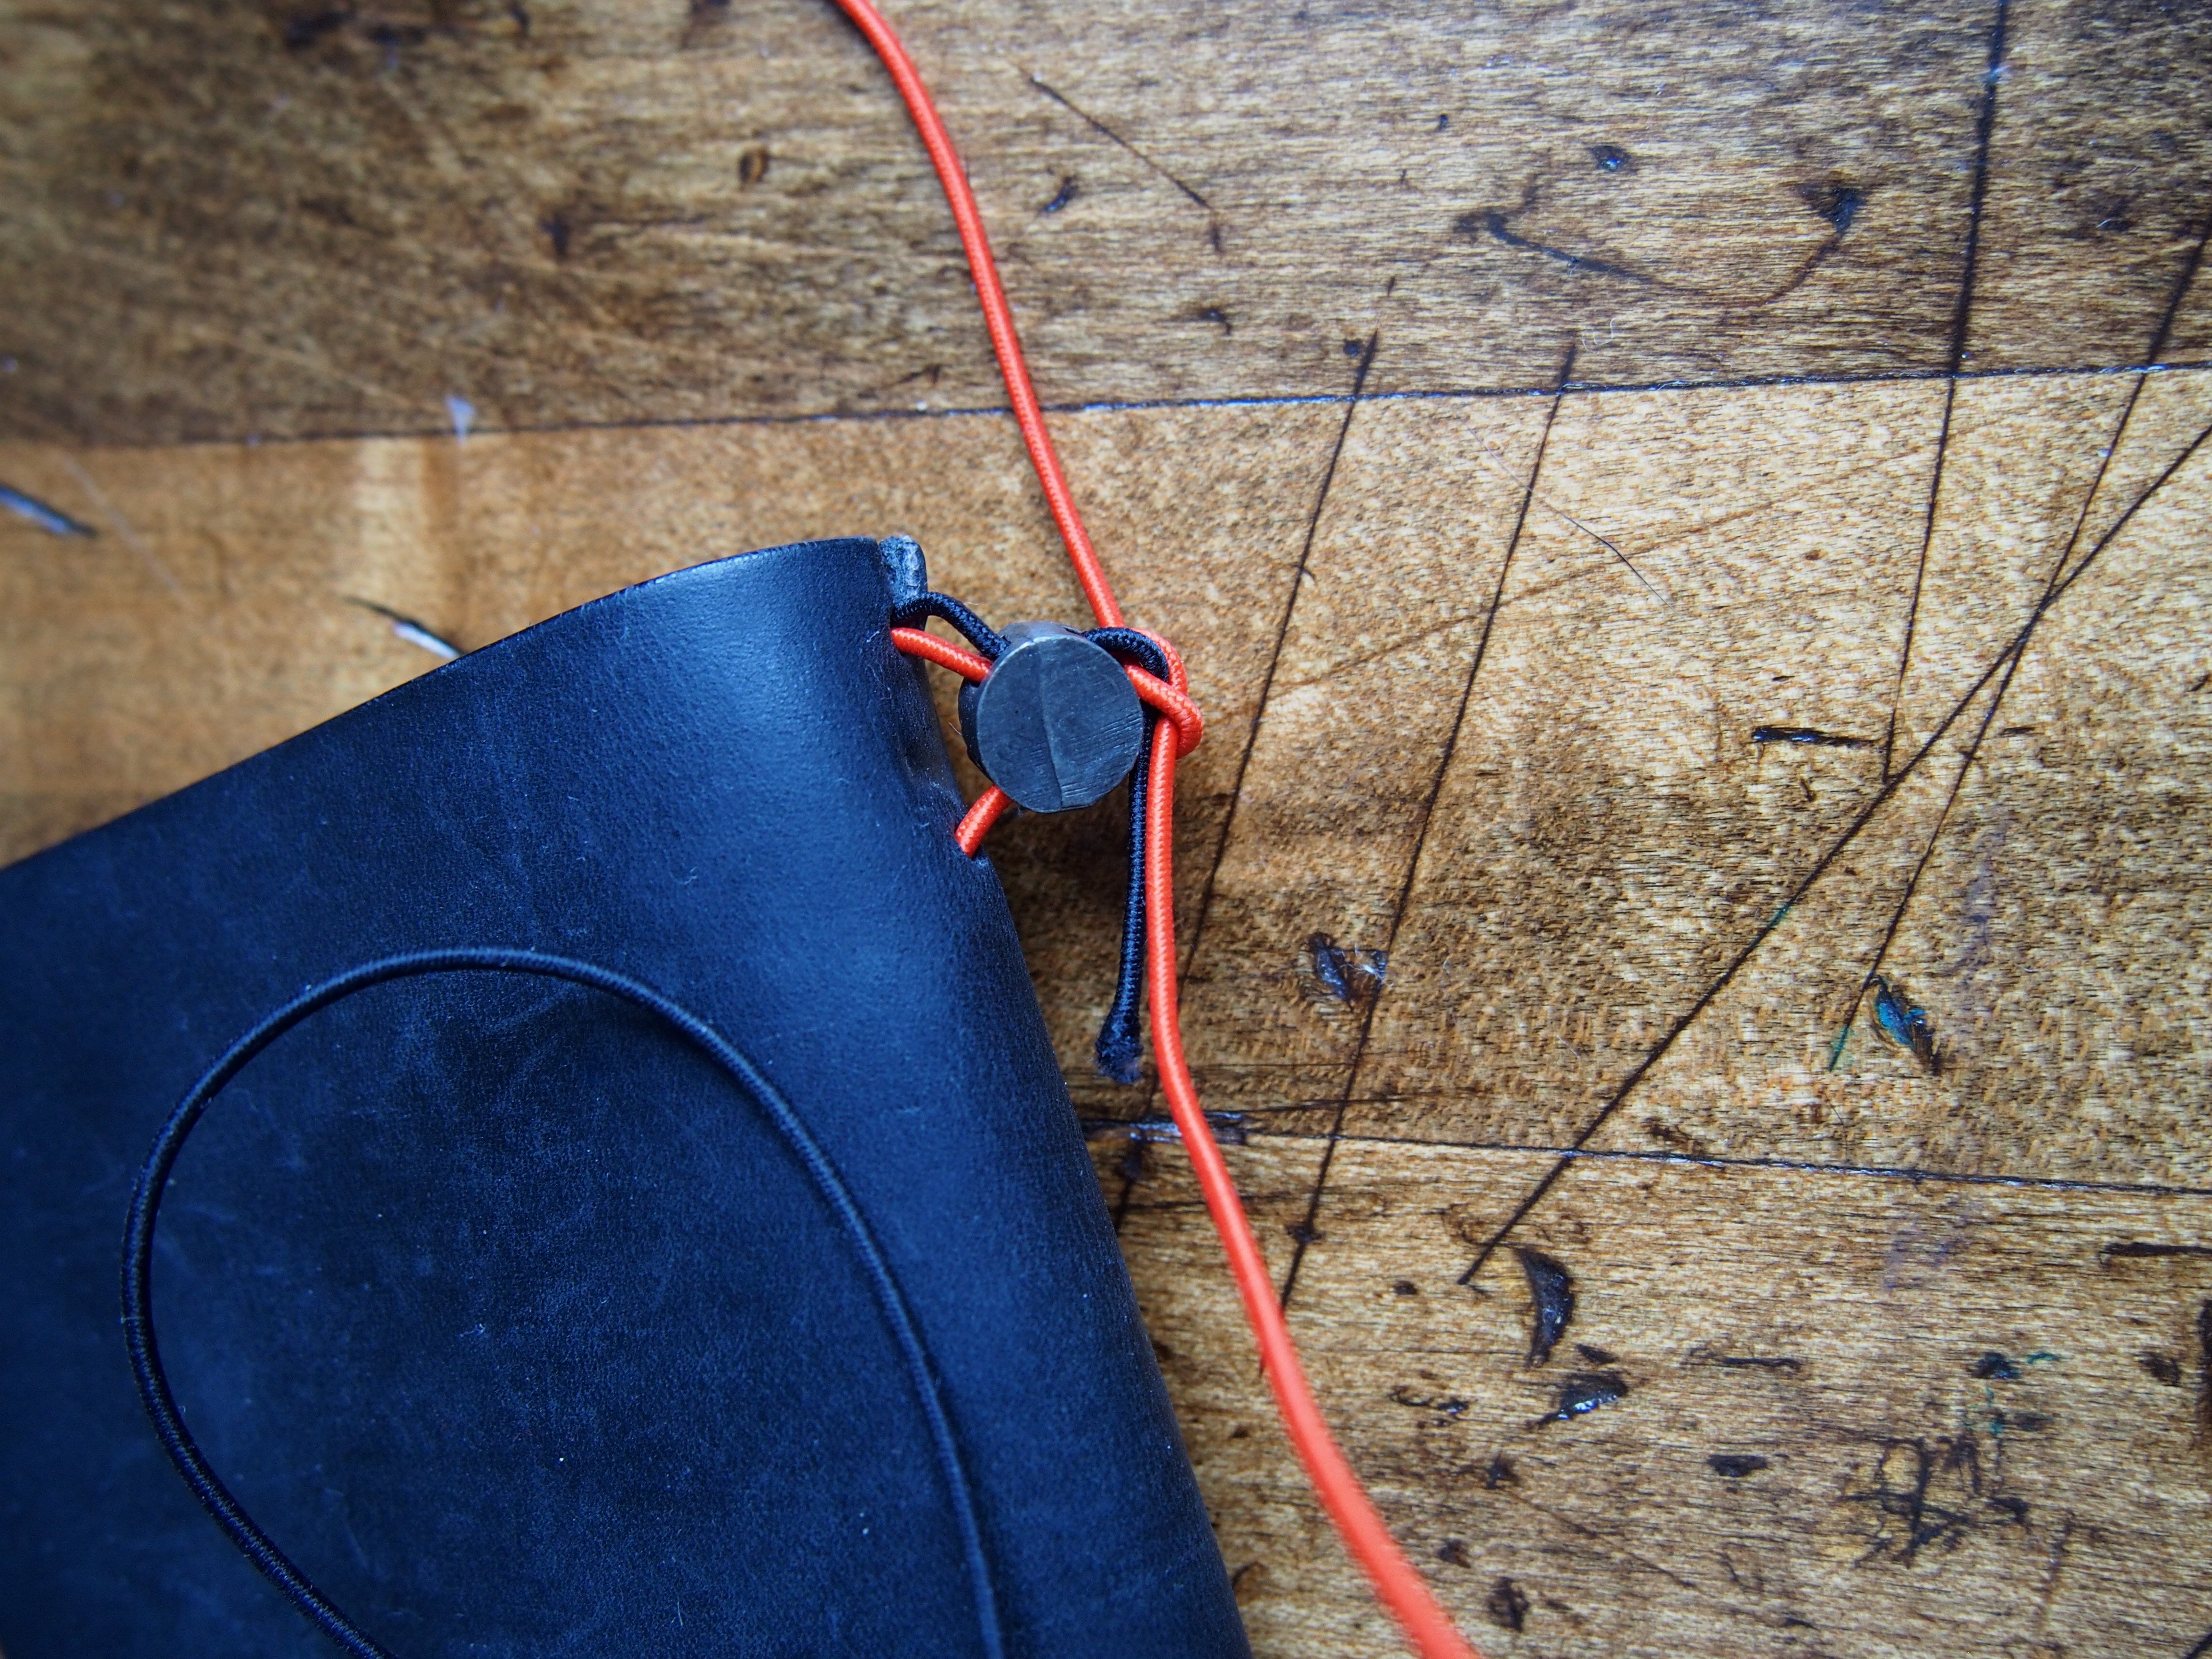 Step 7: Tie a knot. You'll be able to adjust the tightness now. And it's now or never, so take the time to make sure it's how you like. Better to err on the side of tightness, since the elastics can loosen up over time, but if it's too loose, you'll have to re-do the whole thing. 